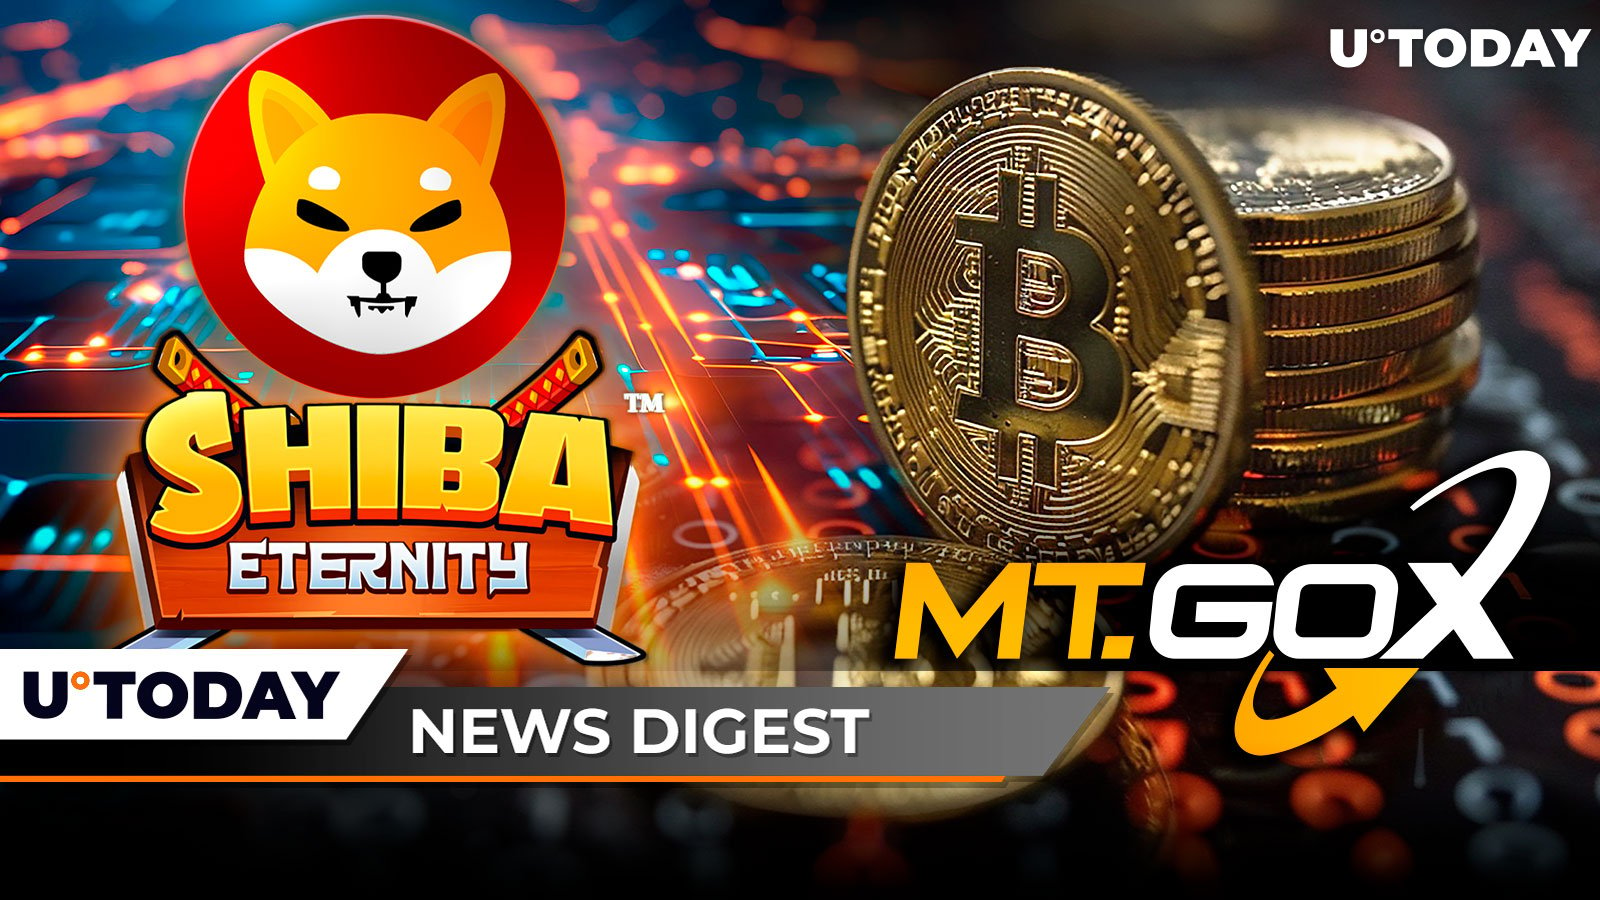 Mt. Gox Makes Enormous BTC Transfer, Shiba Eternity Game Goes Live in Closed Beta, Fidelity's Bitcoin ETF Debuts in London: Crypto News Digest by U.Today